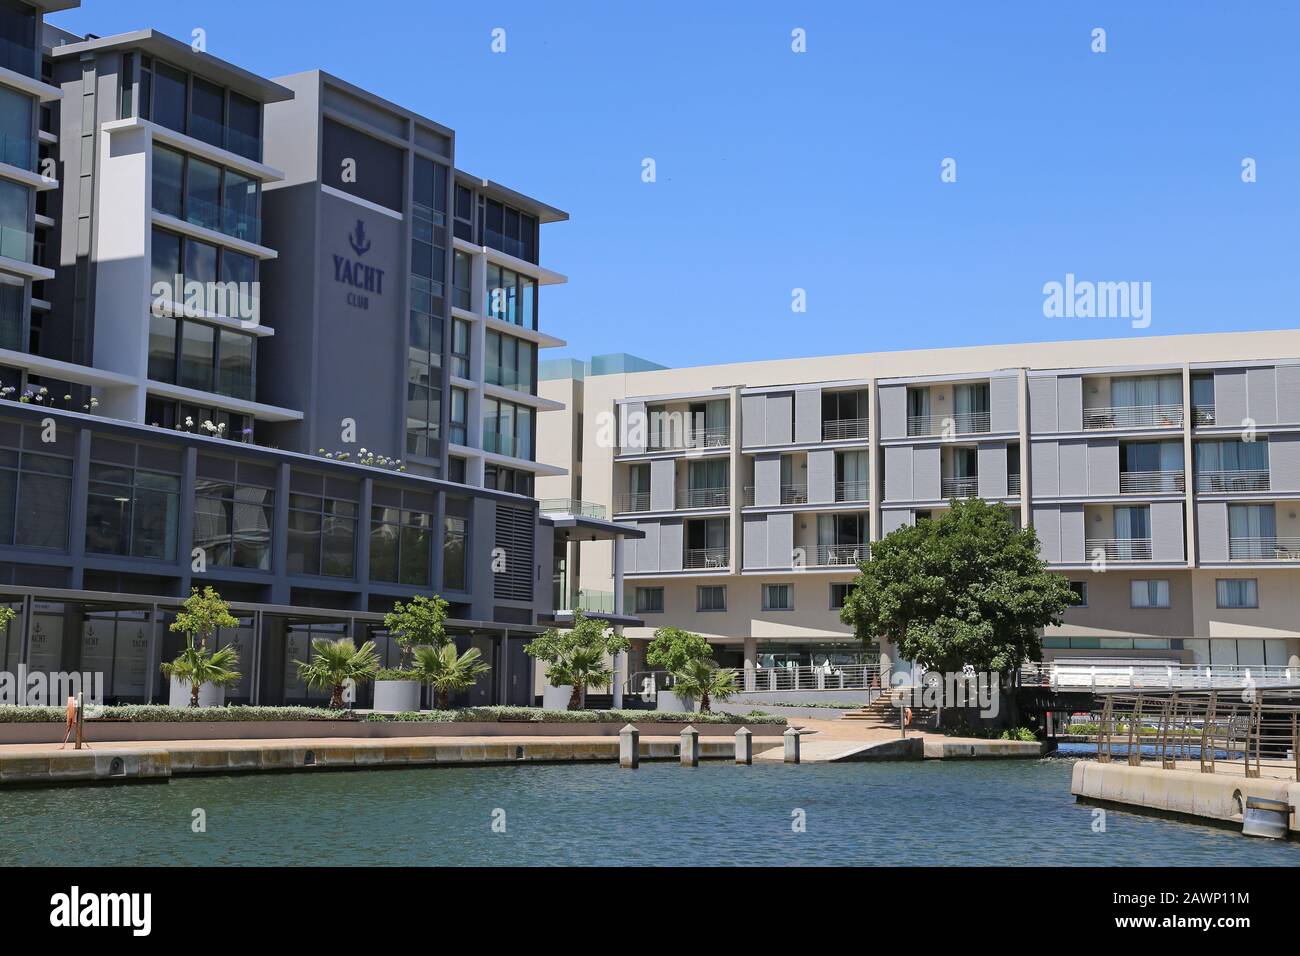 Yacht Club and Harbour Bridge Hotel and Suites, Dockrail Road, Foreshore, Cape Town, Table Bay, Western Cape Province, South Africa, Africa Stock Photo